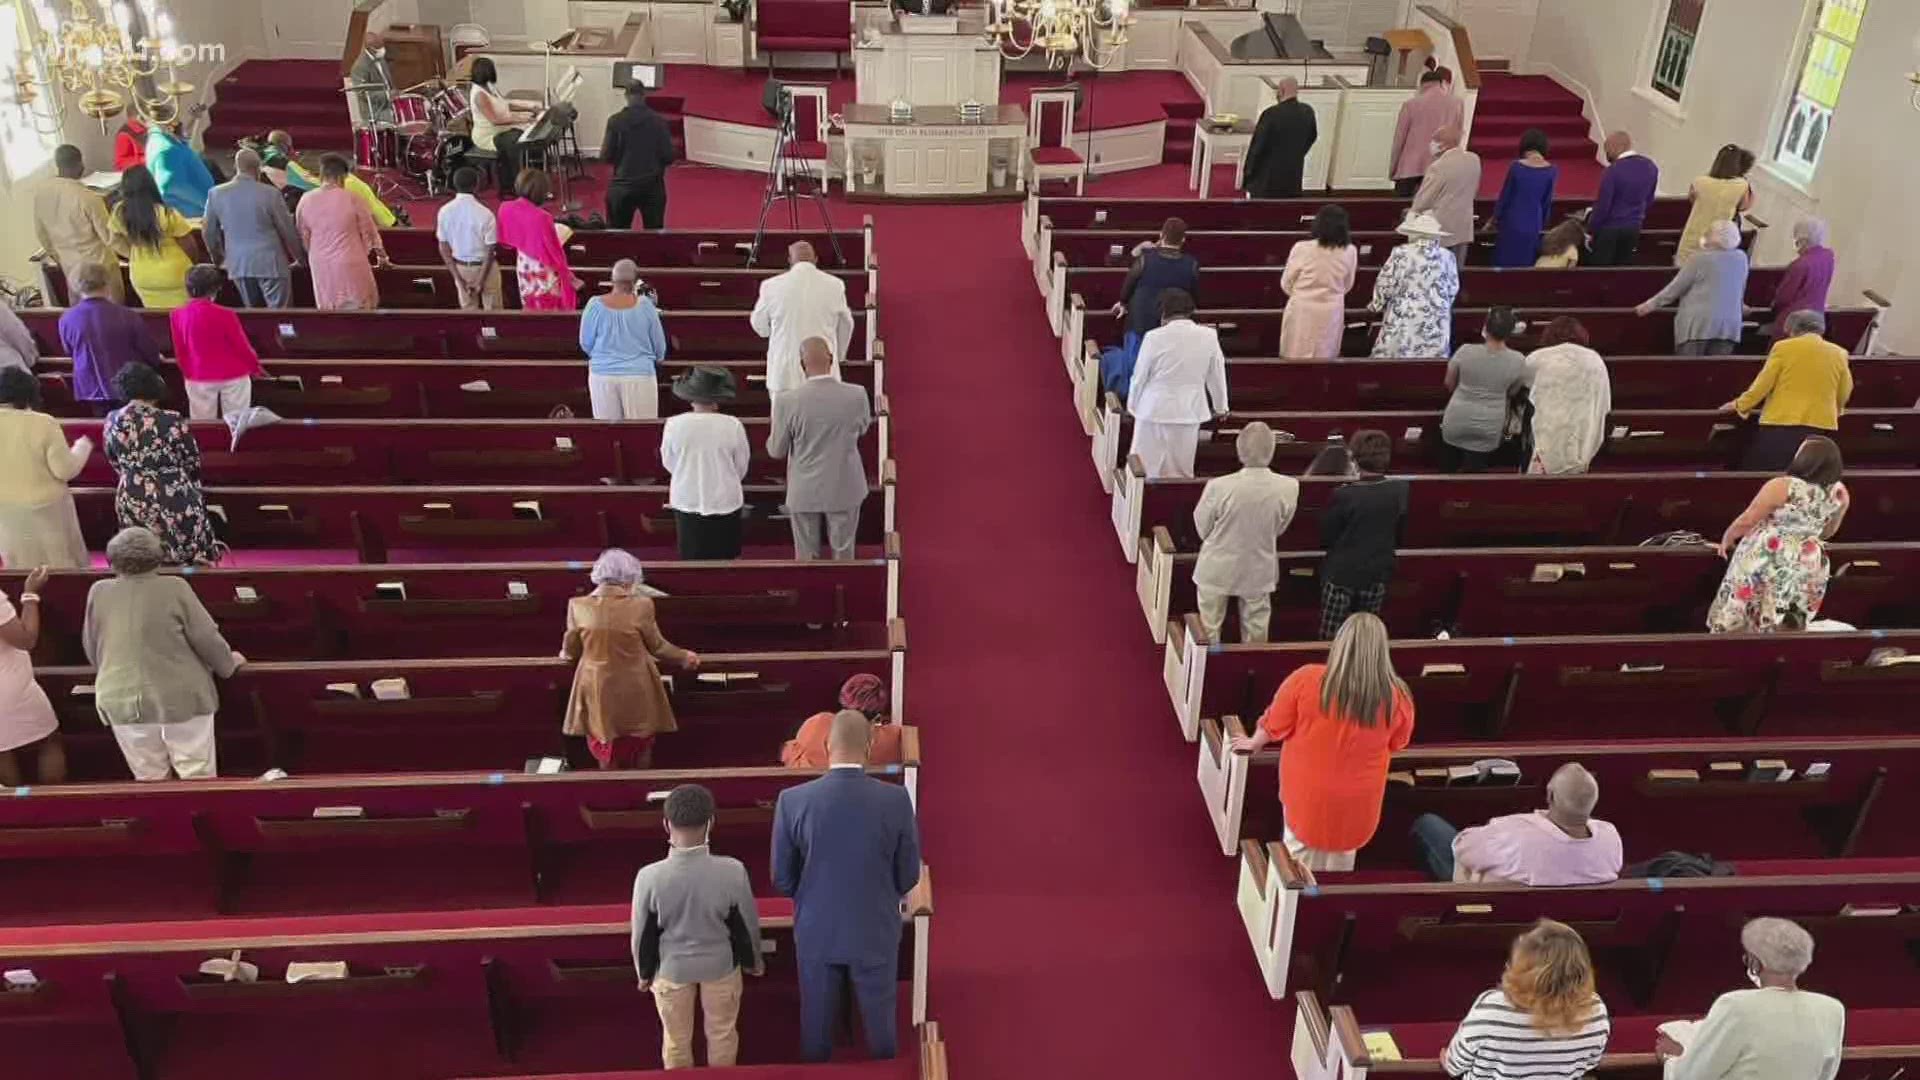 On Easter Sunday 2020, Kentucky churches were operating under strict COVID guidelines. Fast forward to Easter Sunday 2021 and things looked much different.